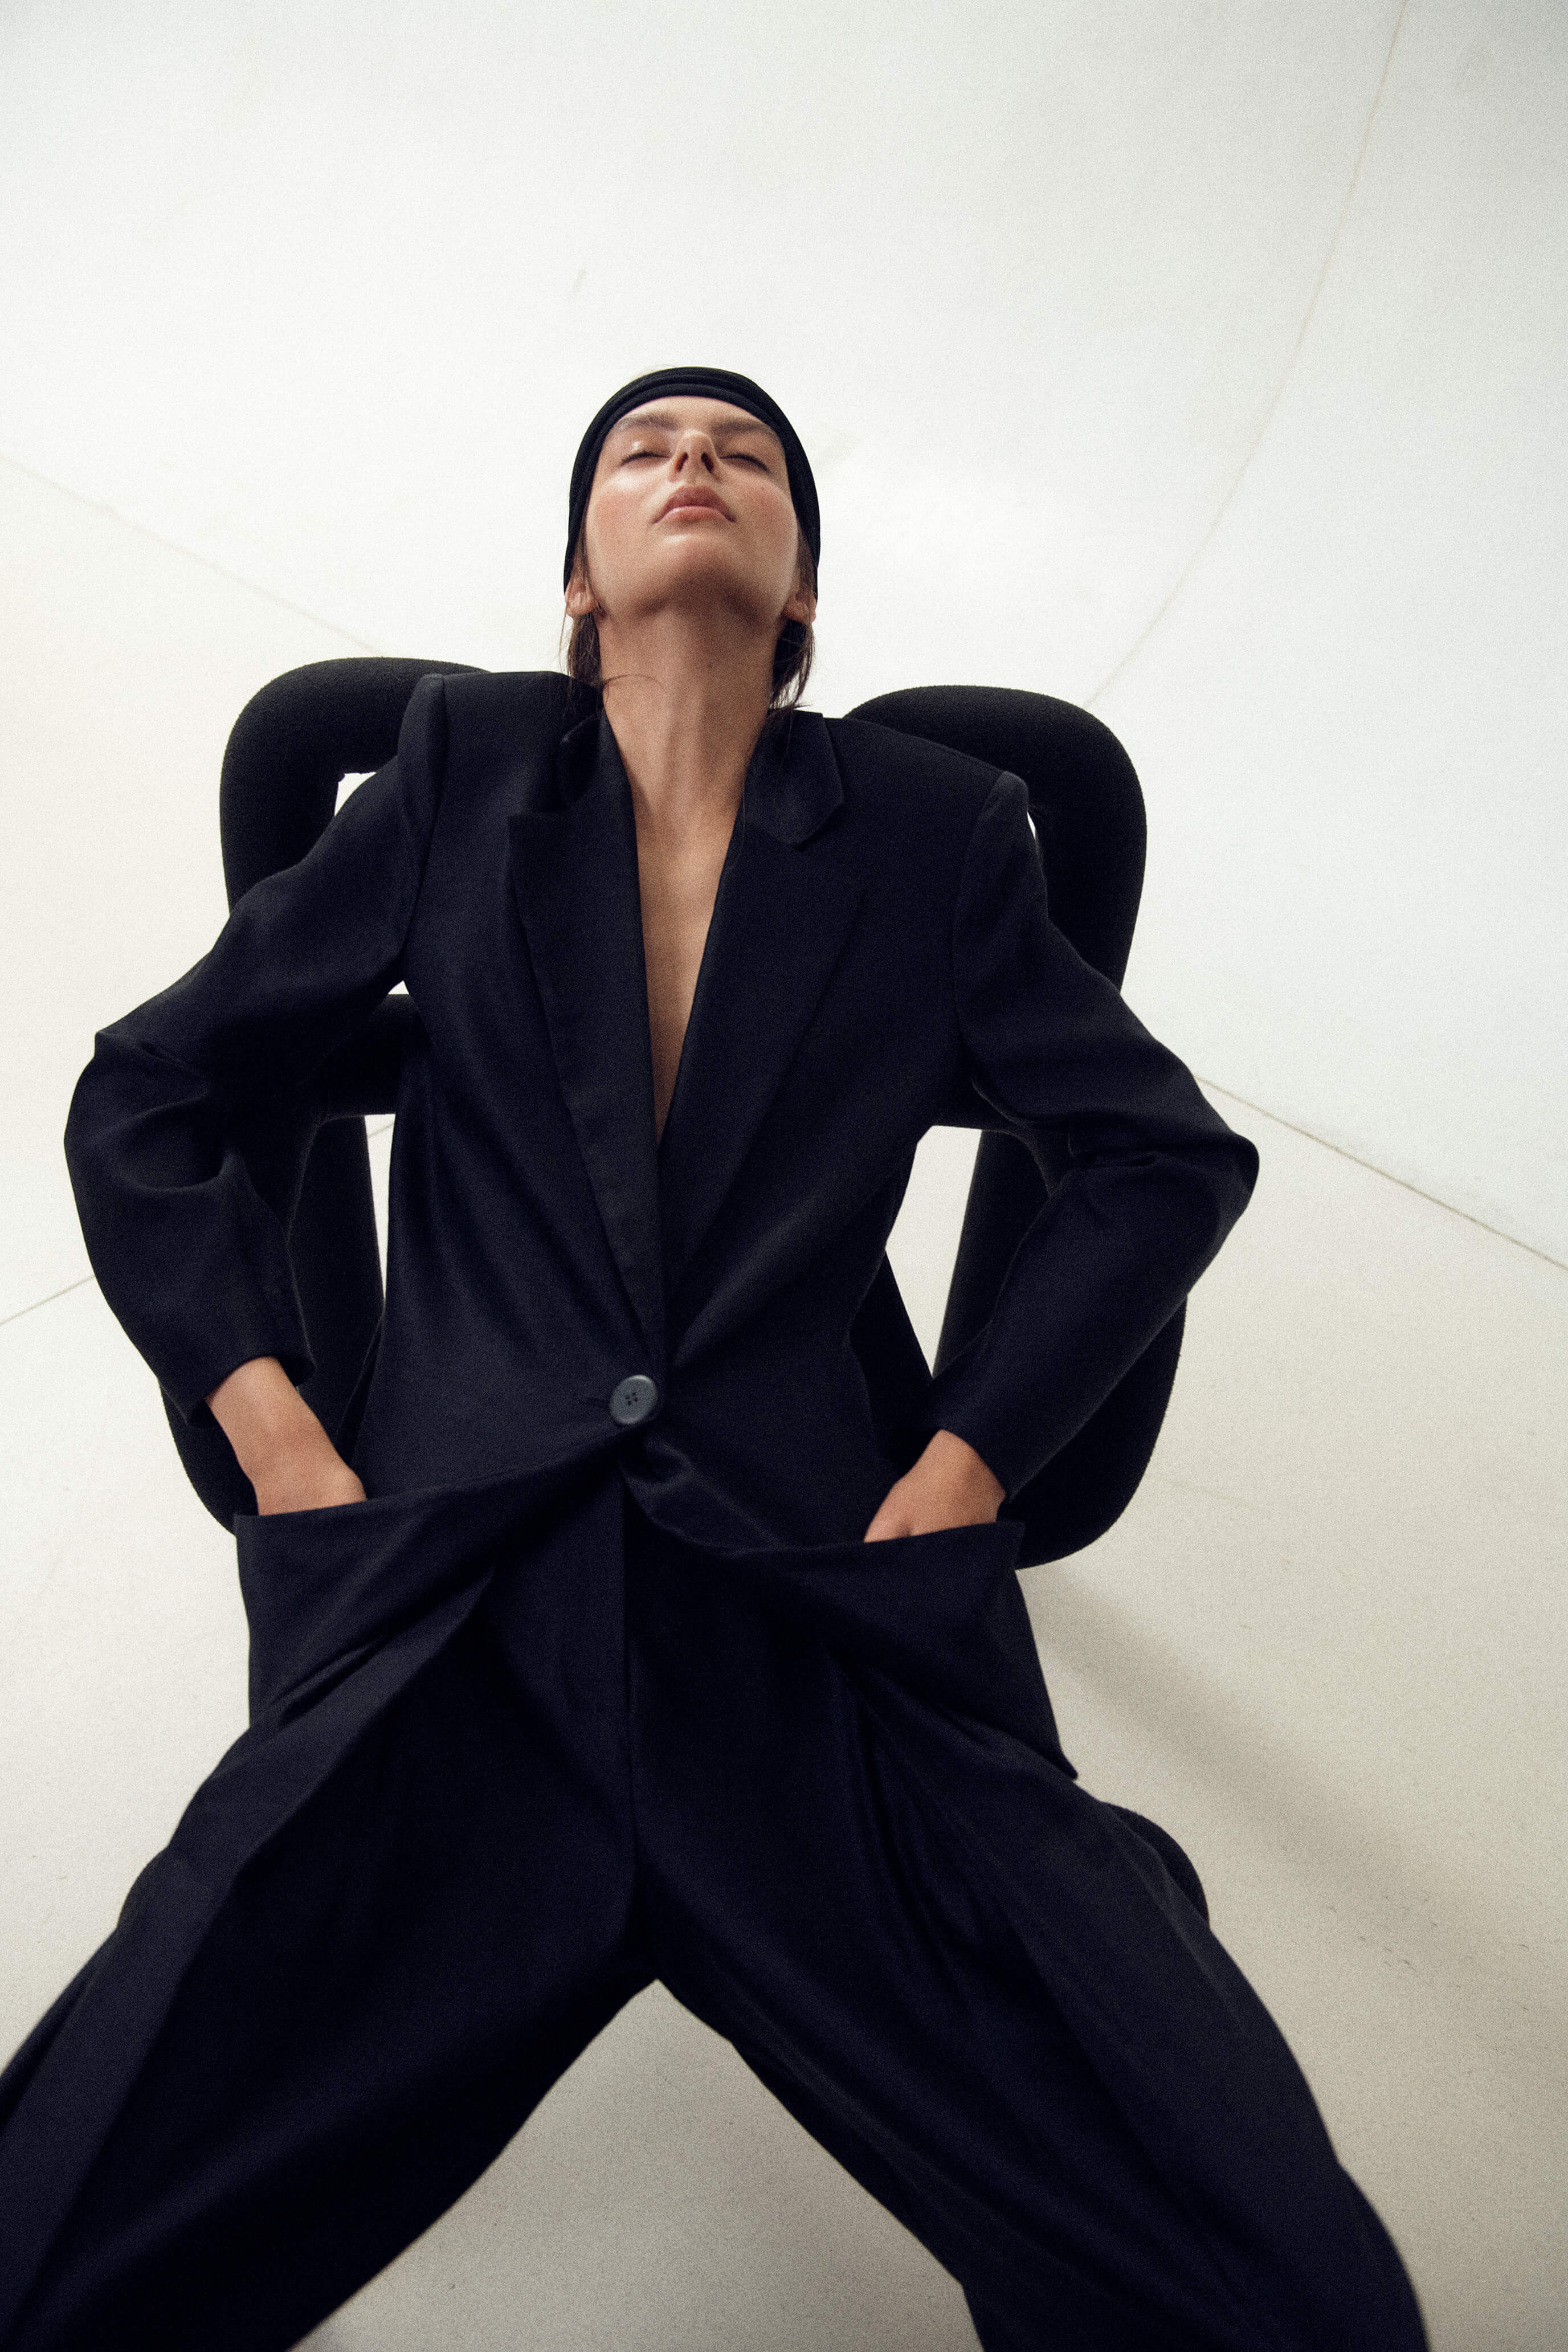 Model lays on chair with head band on and lack suit with hands in pockets.